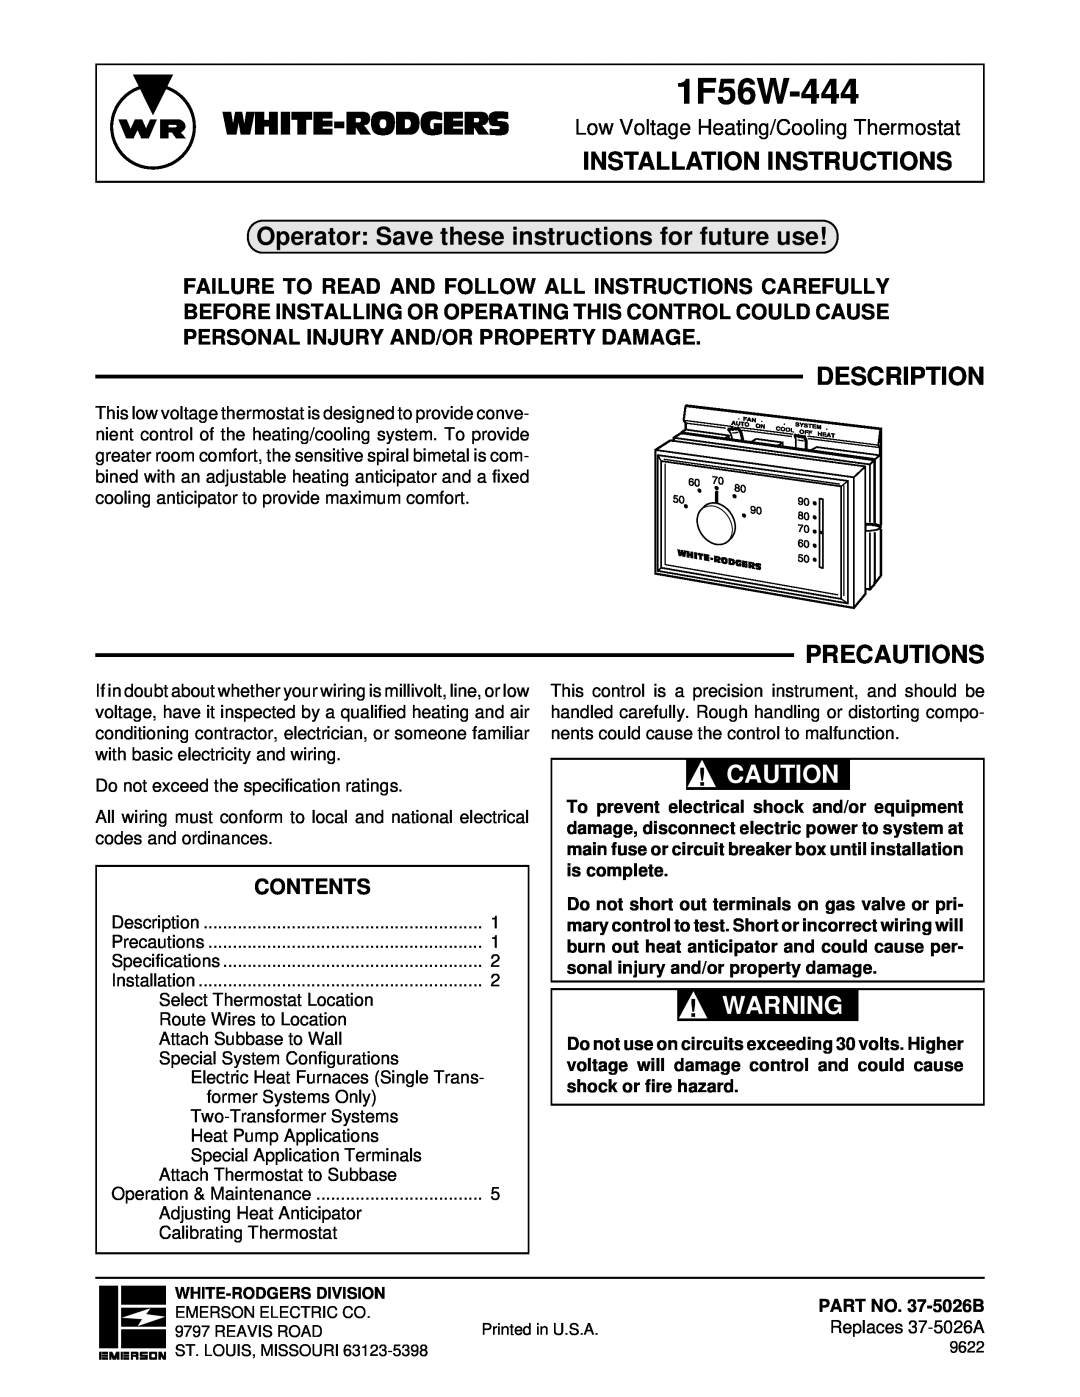 White Rodgers 1F56W-444 installation instructions Installation Instructions, Description, Precautions, Contents 